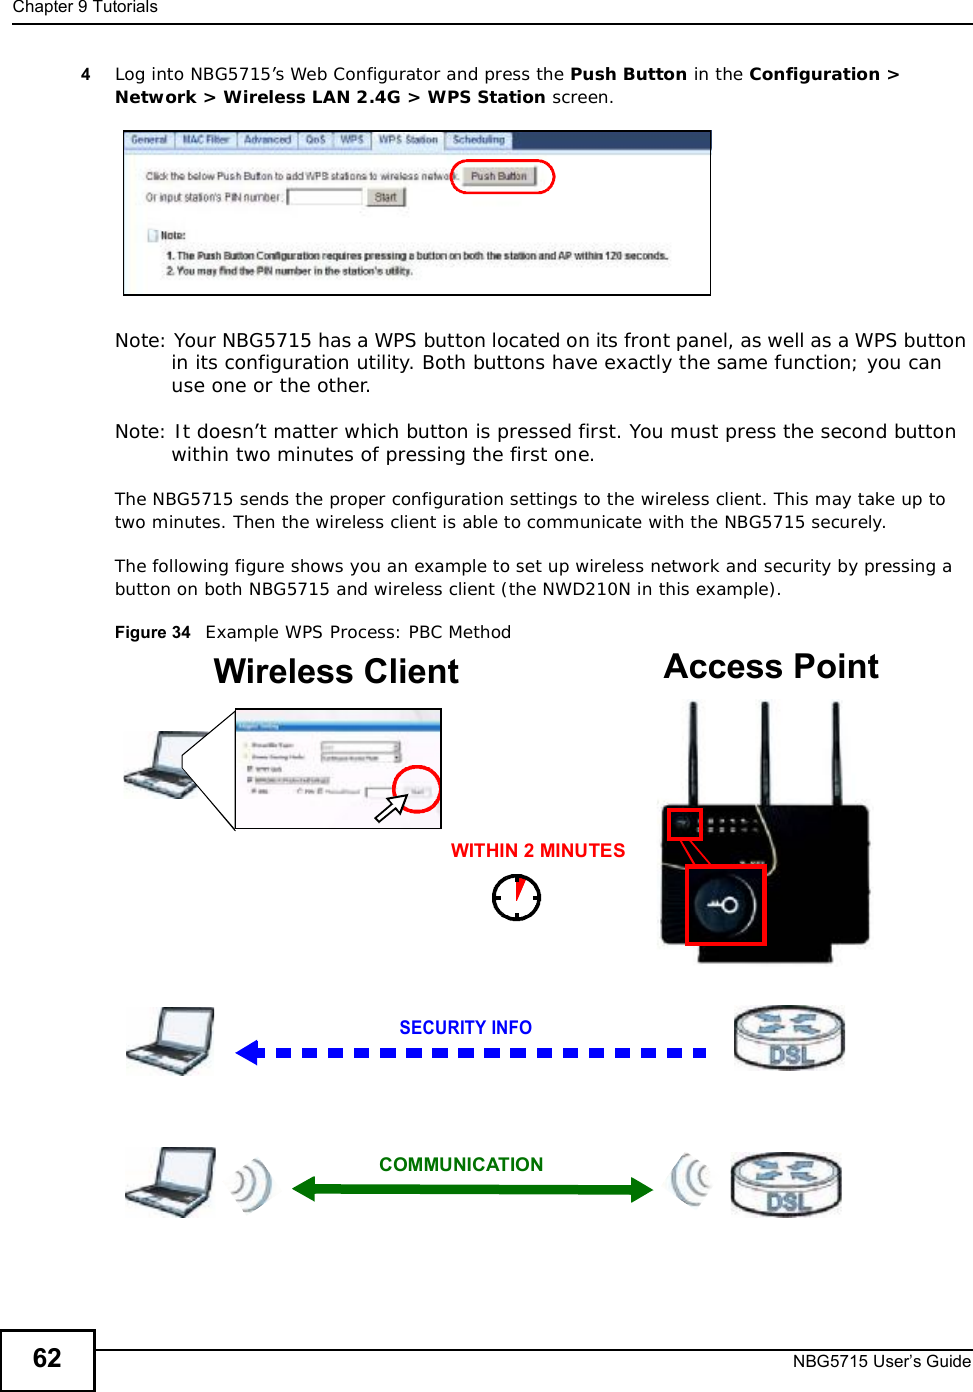 Chapter 9TutorialsNBG5715 User’s Guide624Log into NBG5715’s Web Configurator and press the Push Button in the Configuration &gt; Network &gt; Wireless LAN 2.4G &gt; WPS Station screen. Note: Your NBG5715 has a WPS button located on its front panel, as well as a WPS button in its configuration utility. Both buttons have exactly the same function; you can use one or the other.Note: It doesn’t matter which button is pressed first. You must press the second button within two minutes of pressing the first one. The NBG5715 sends the proper configuration settings to the wireless client. This may take up to two minutes. Then the wireless client is able to communicate with the NBG5715 securely. The following figure shows you an example to set up wireless network and security by pressing a button on both NBG5715 and wireless client (the NWD210N in this example).Figure 34   Example WPS Process: PBC MethodWireless Client    Access PointSECURITY INFOCOMMUNICATIONWITHIN 2 MINUTES